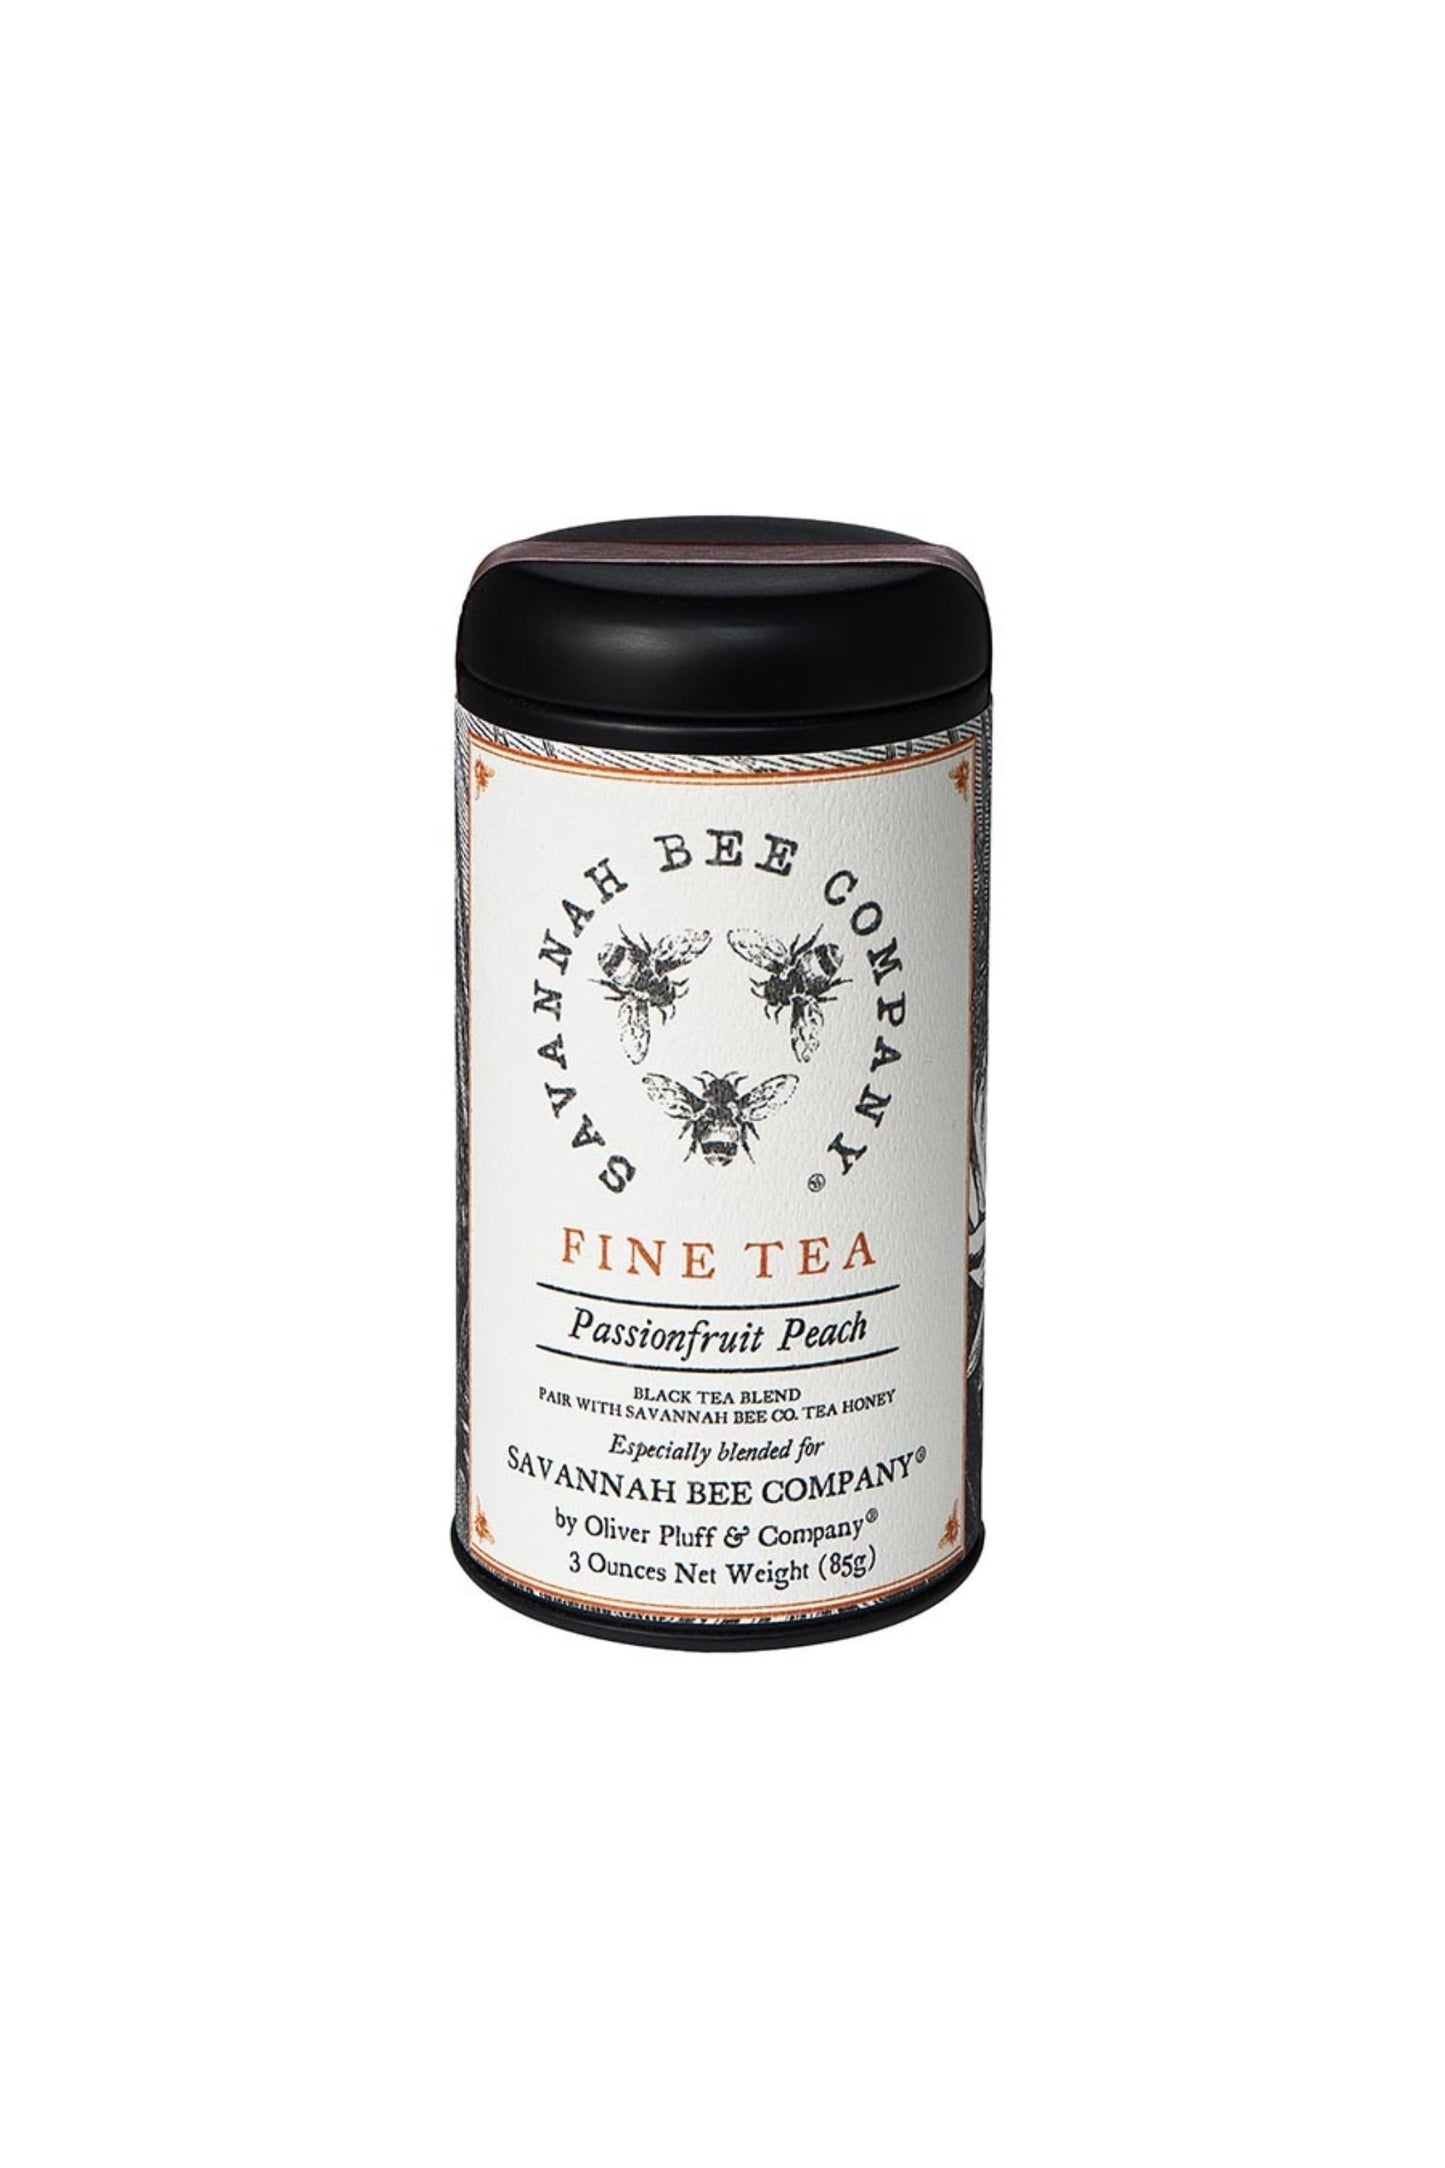 4 ounce package of passionfruit peach loose leaf tea.